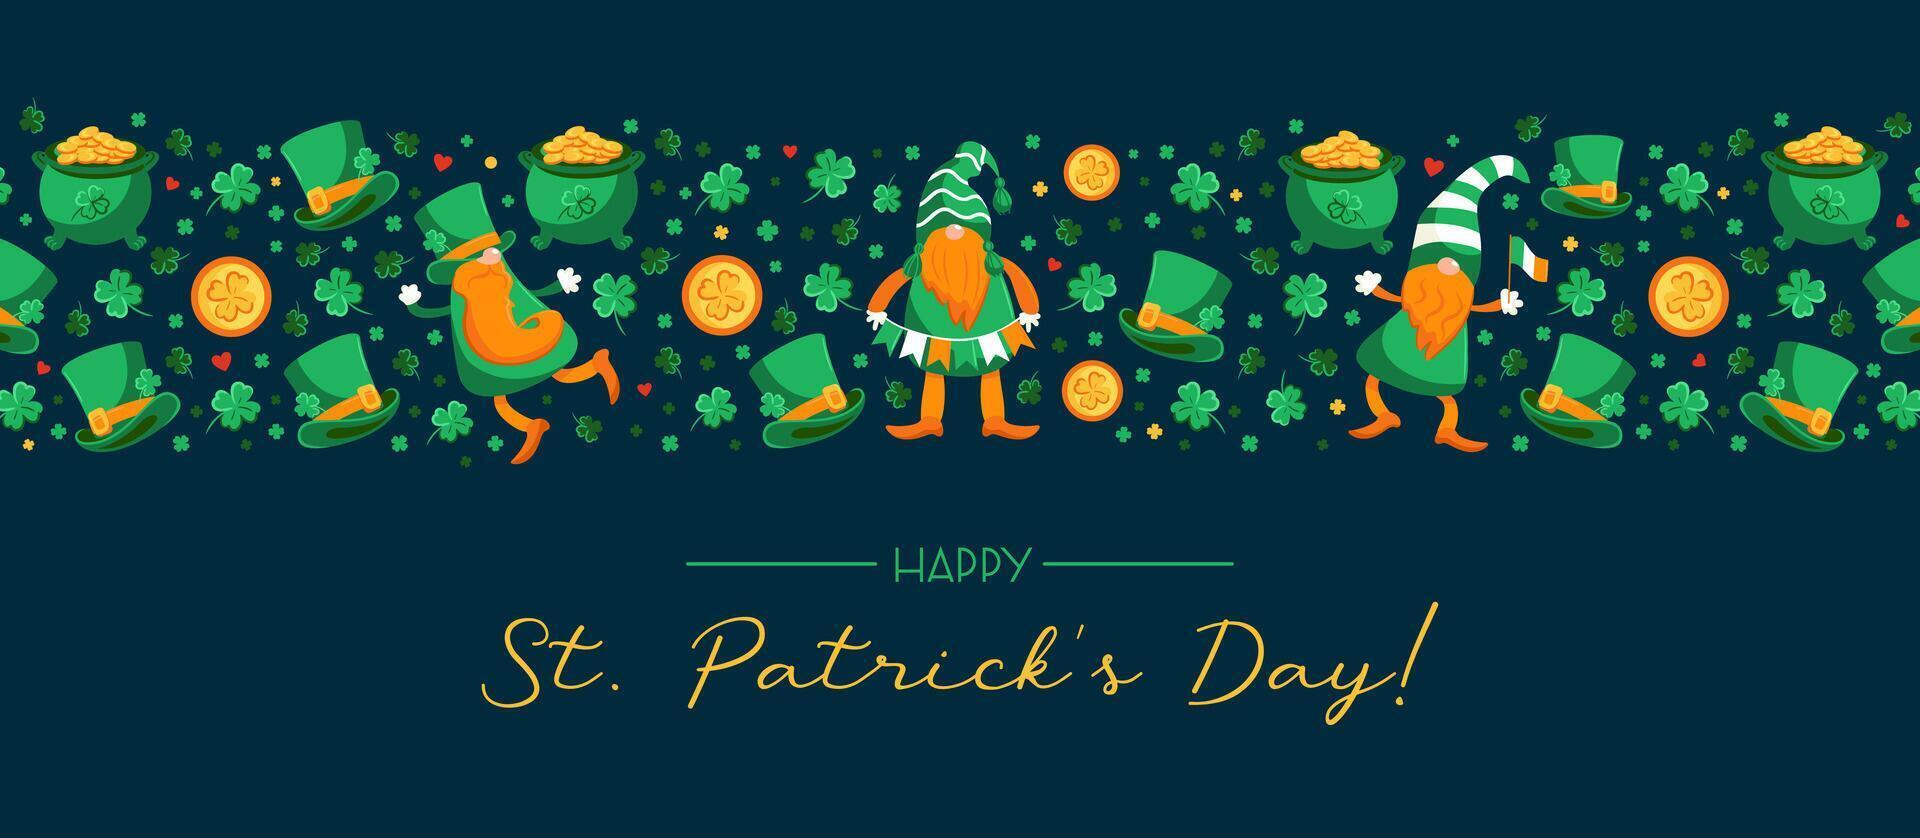 Horizontal banner of St. Patricks Day symbols. leprechauns. Cartoon characters in top hat, with garland, Irish flag. Golden cauldron, vintage. Four-leaf clover. Good luck. Magic, religious traditions vector